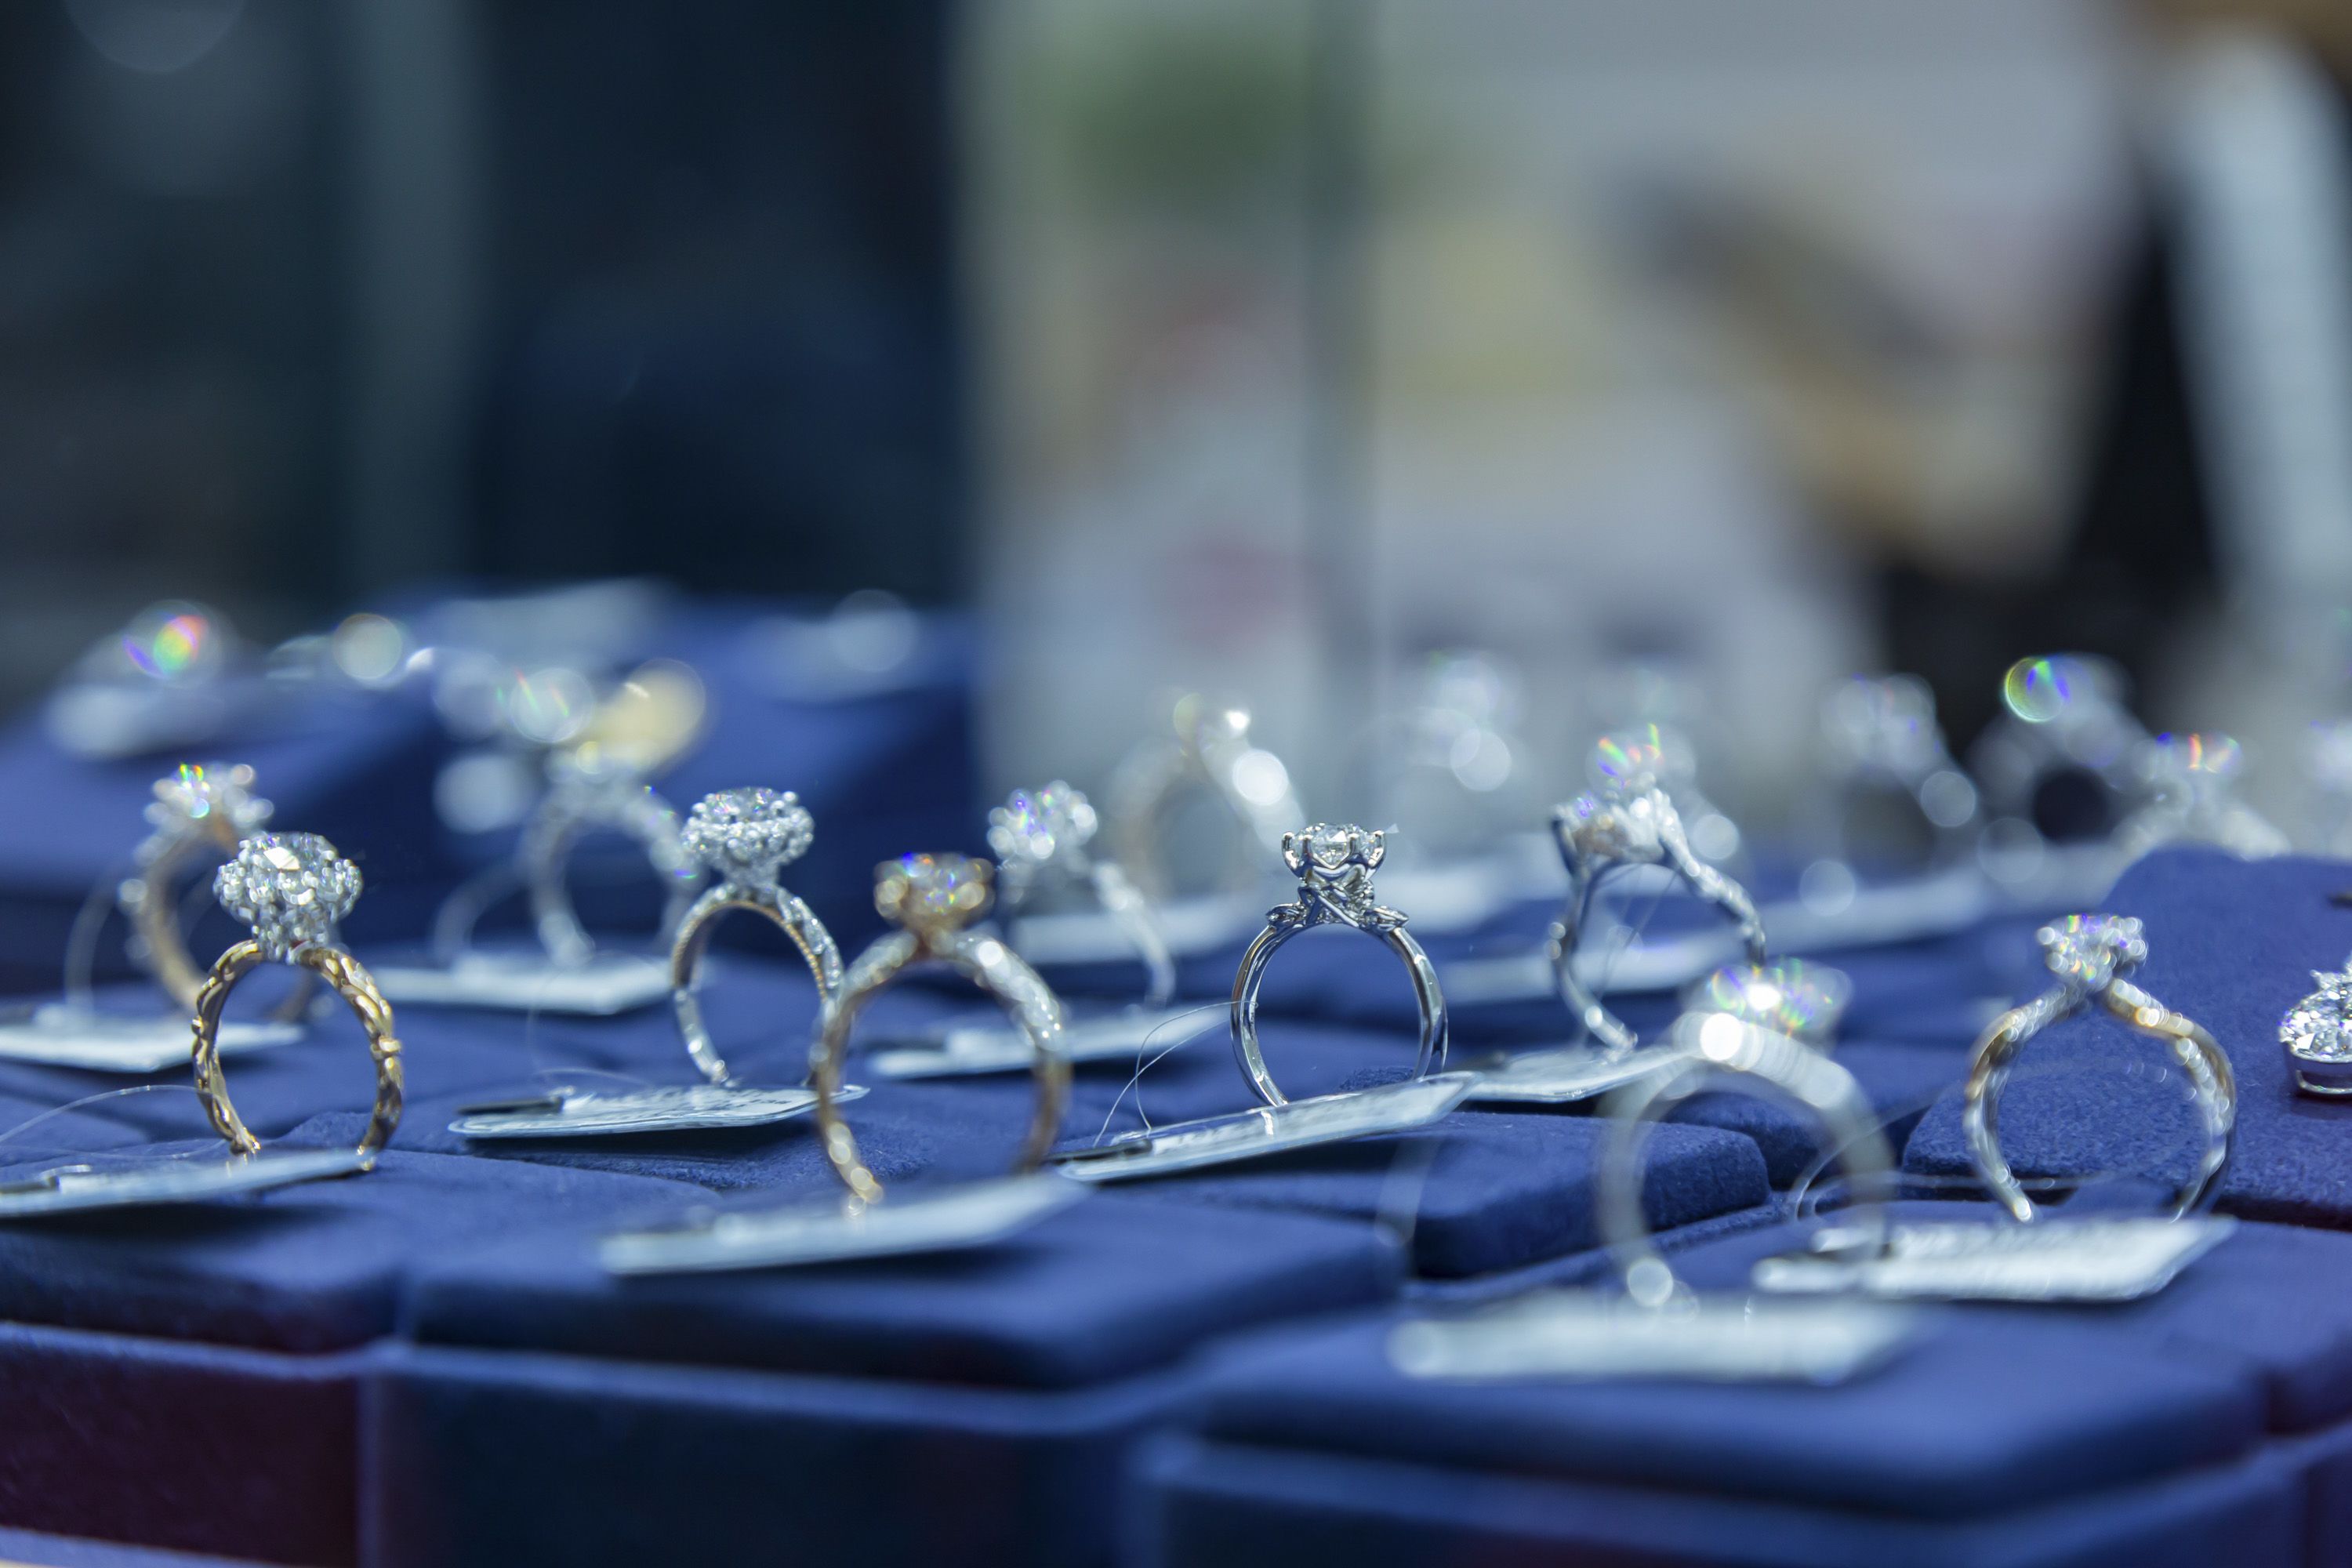 ZHENGZHOU, CHINA - SEPTEMBER 20 2023: A view of diamond rings for sale at a trade fair for synthetic diamonds in Zhengzhou in central China's Henan province. Henan produces approximately 12 billion carats of industrial synthetic diamonds each year. (Photo credit should read ZUO DONGCHEN / Feature China/Future Publishing via Getty Images)